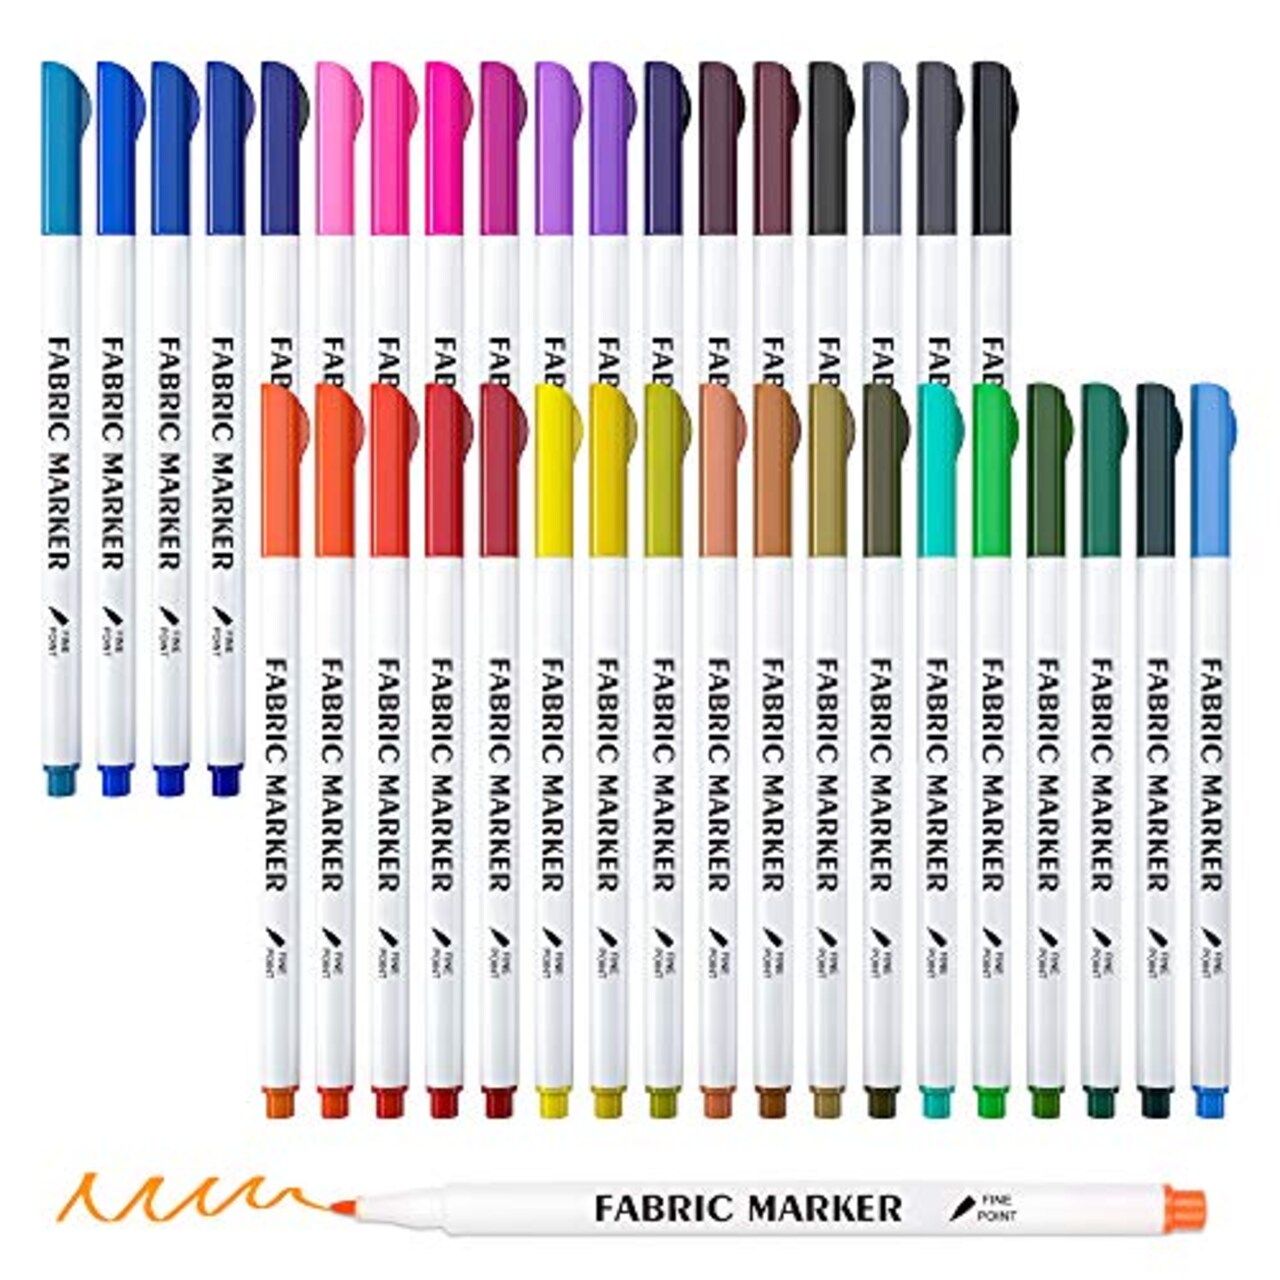 Fabric Markers, Lelix 36 Colors Permanent Fabric Pens for Writing Painting  on T-Shirts Clothes Sneakers Canvas, Child Safe & Non-Toxic for Kids Adults